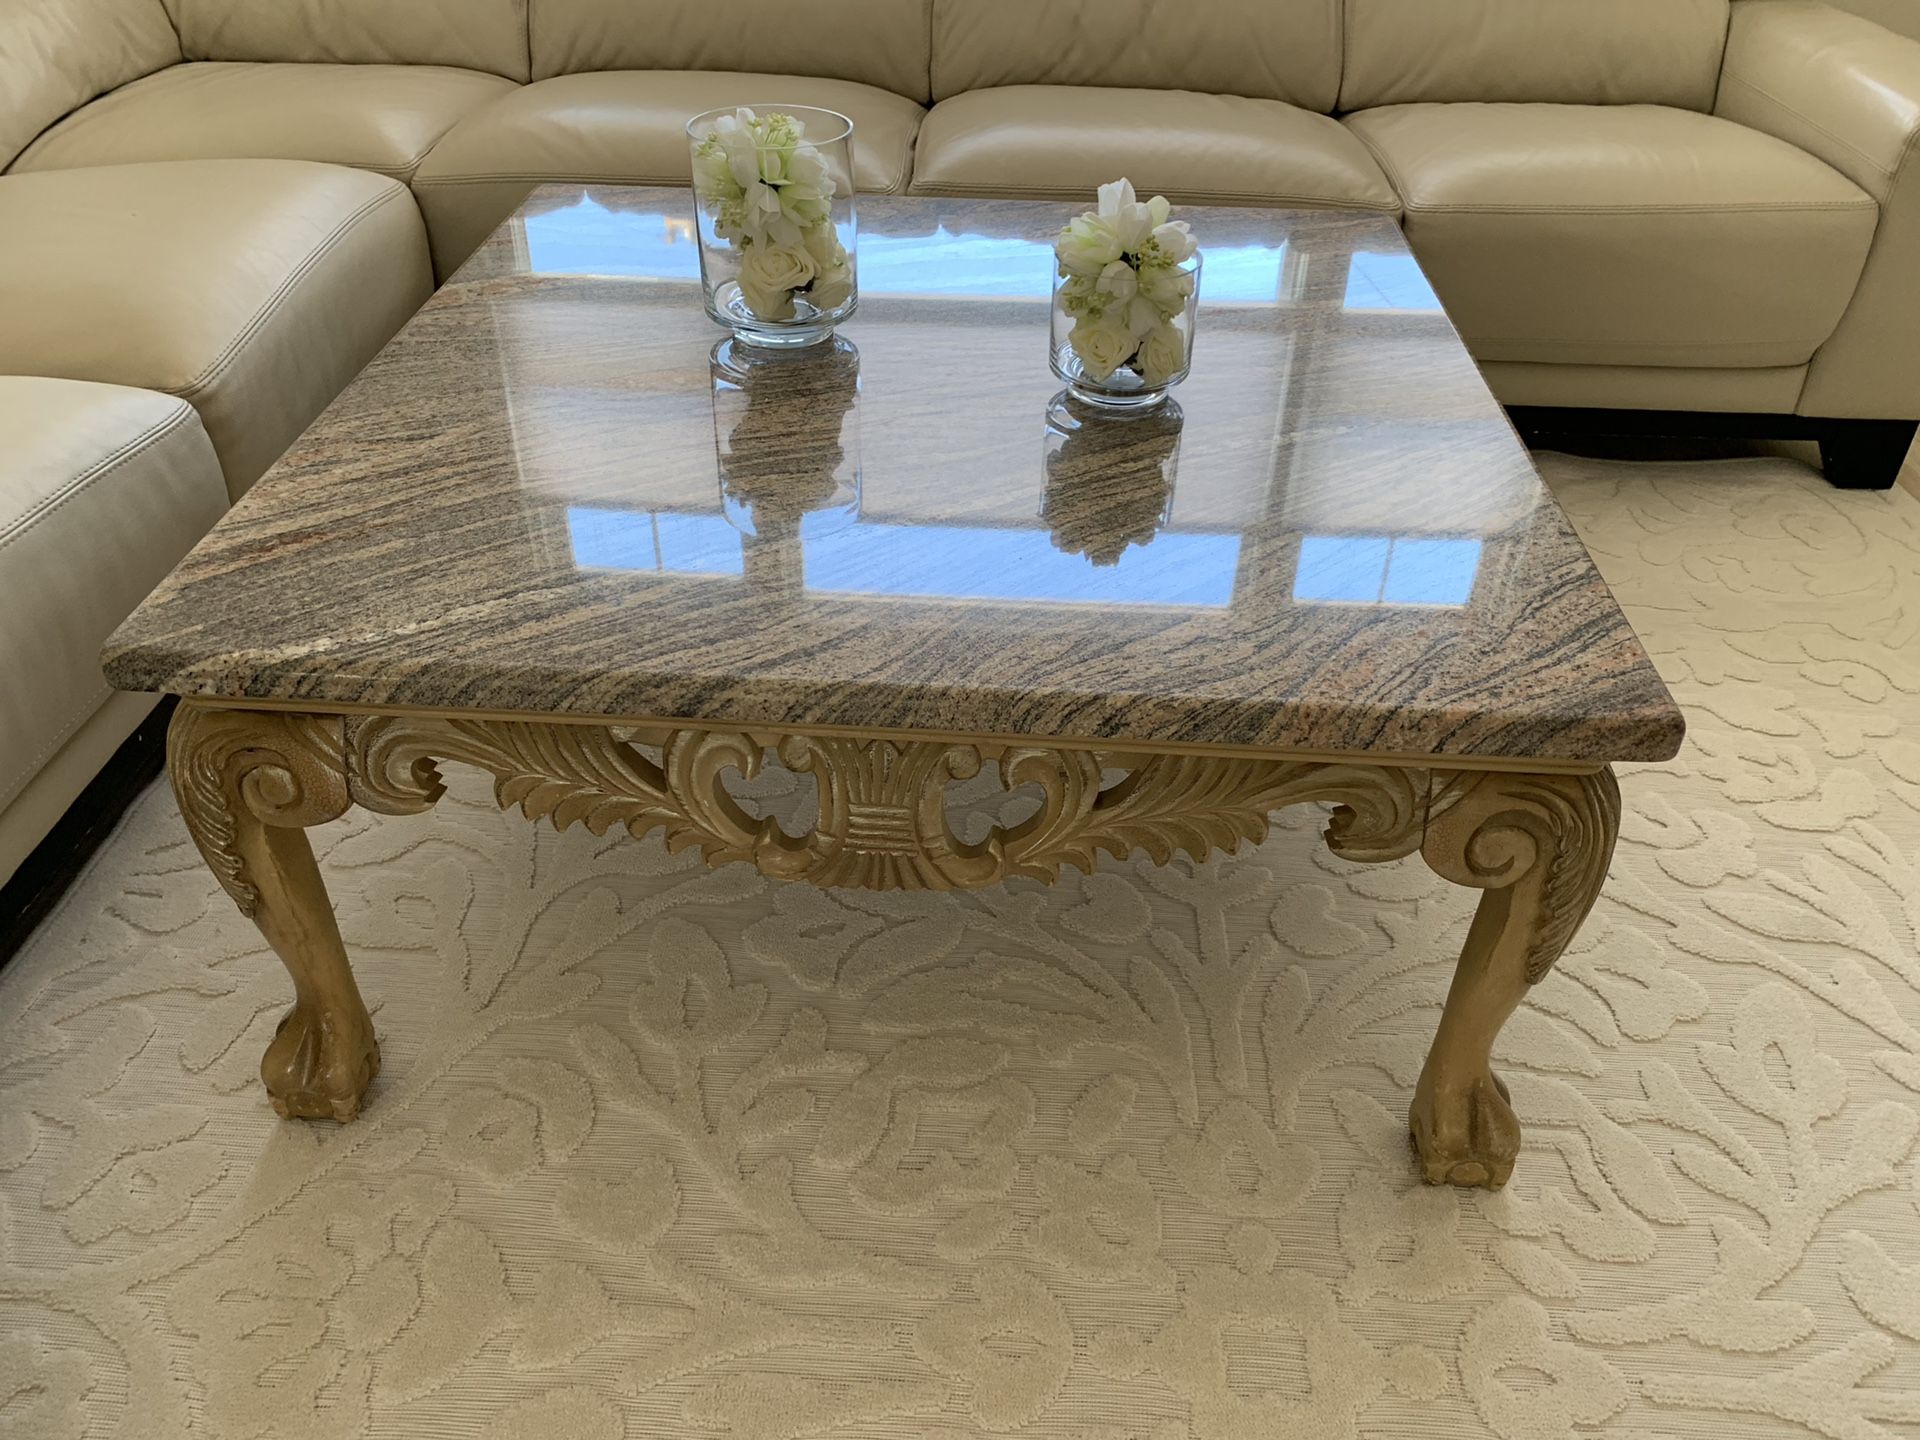 Coffee table with granite table top